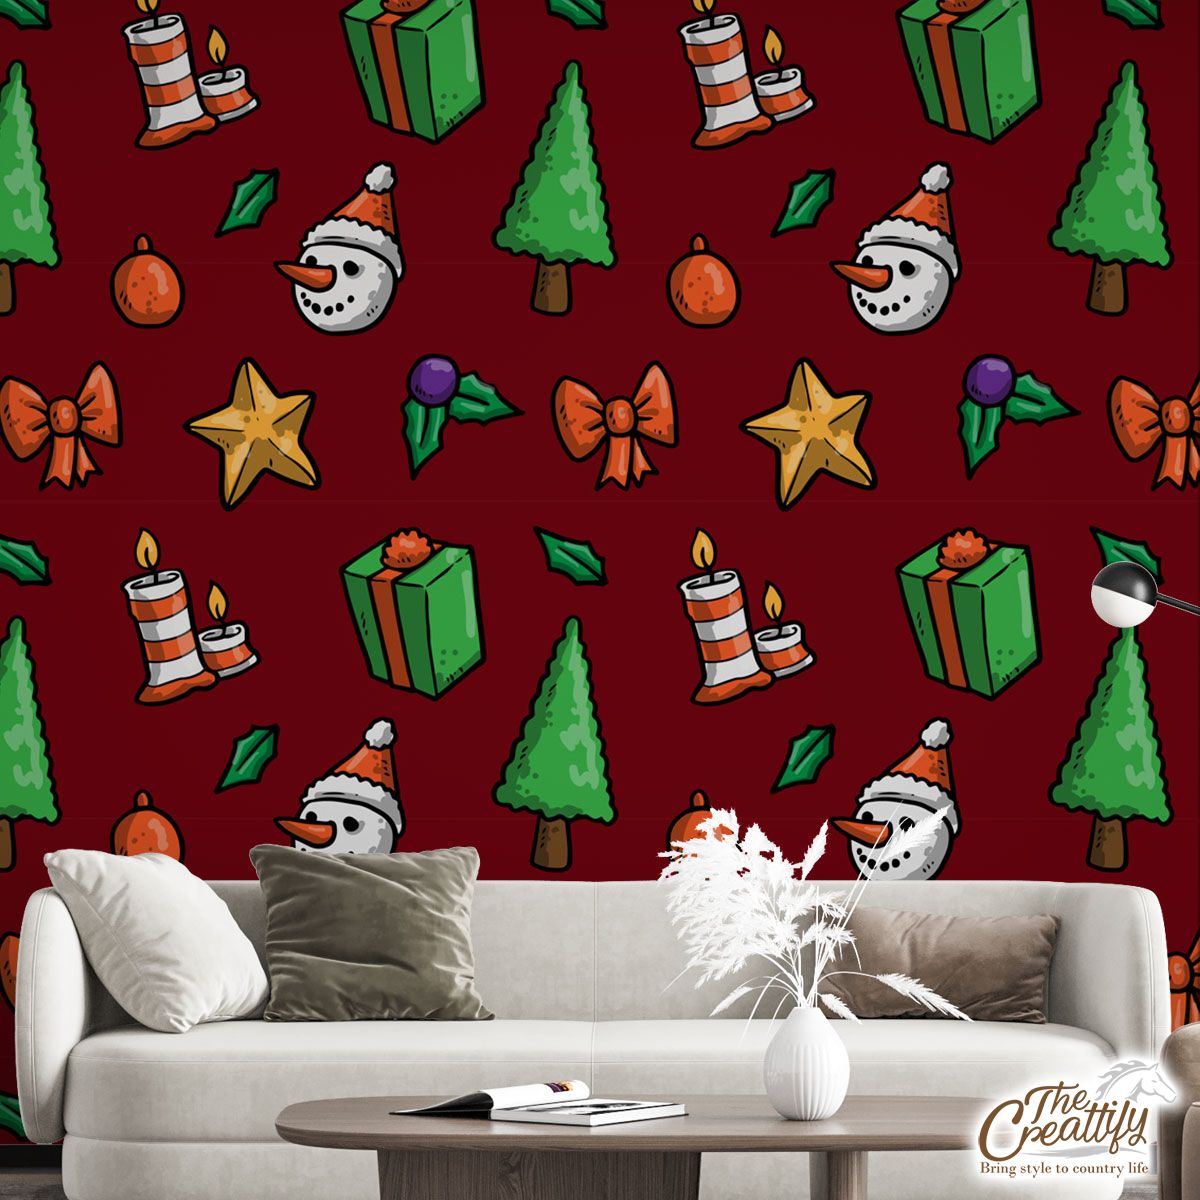 Christmas Gifts, Candles, Pine Tree And Snowman FaceWith Santa Hat Red Pattern Wall Mural